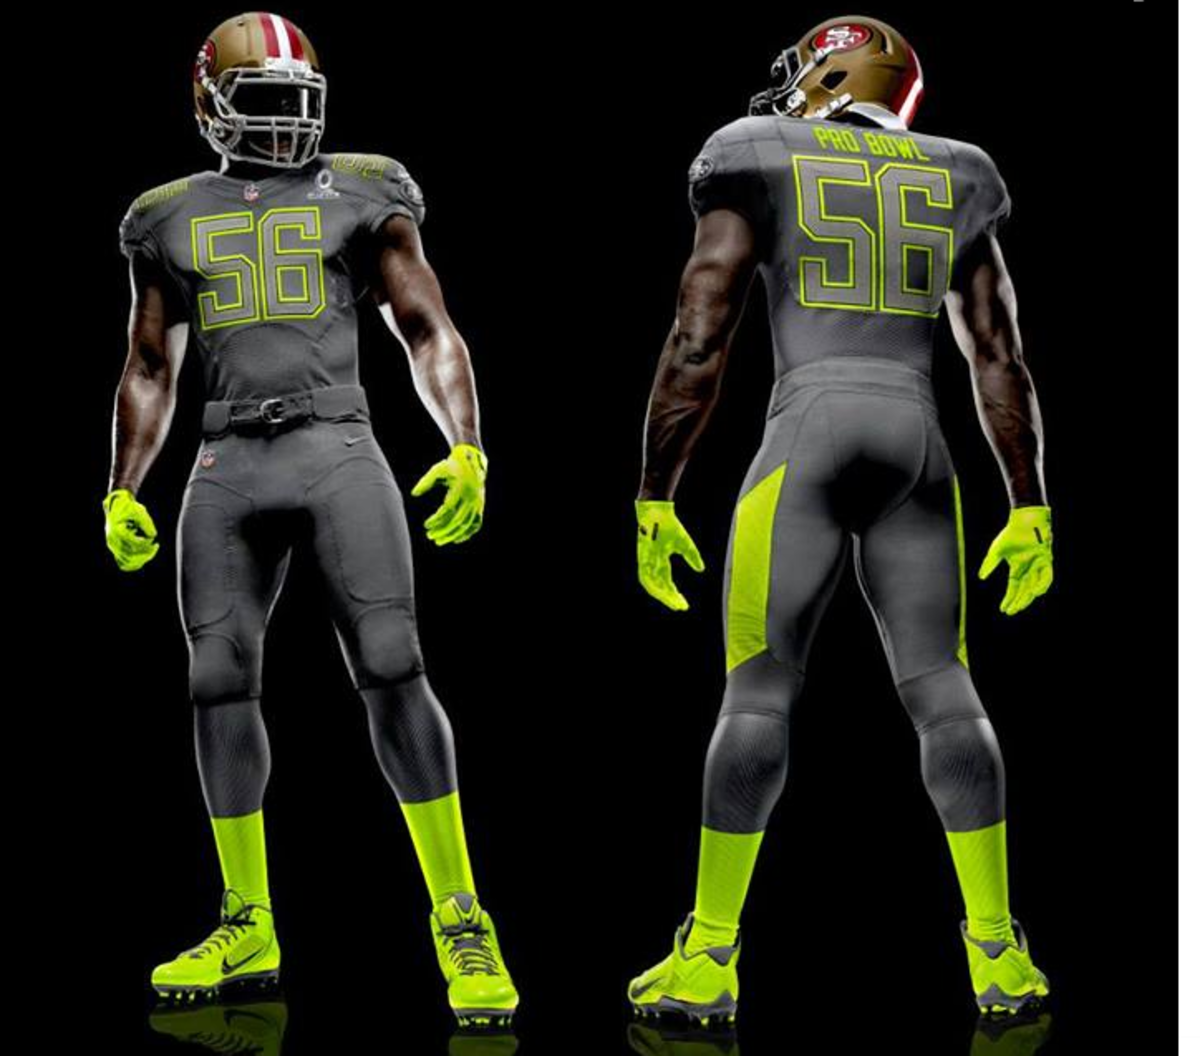 Nike has unveiled new uniforms for the Pro Bowl - Footballscoop